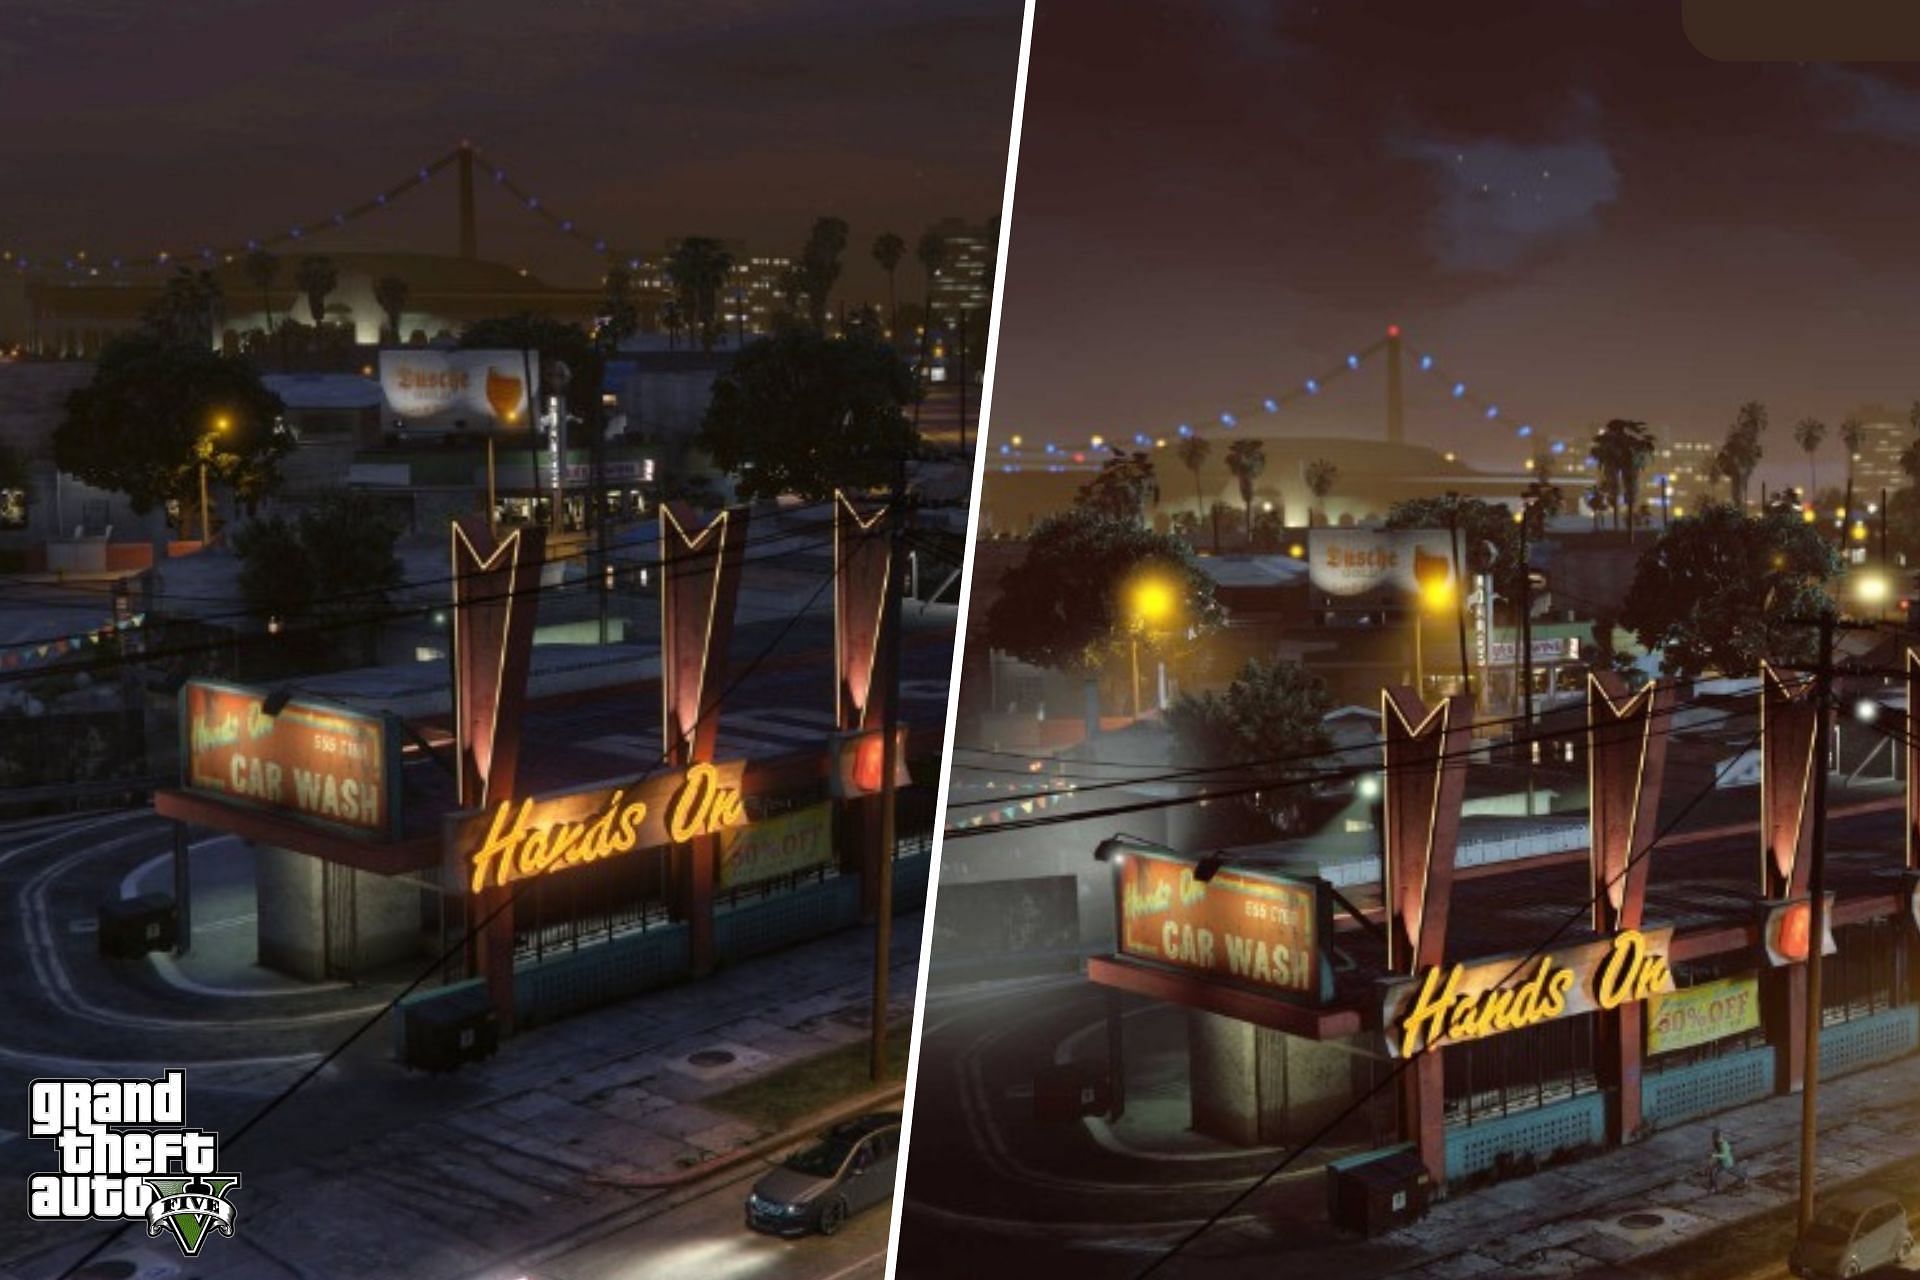 GTA 5 2022: Do the graphics from the PS5 version hold their own against the PC version?(Image via GTA Series Video)